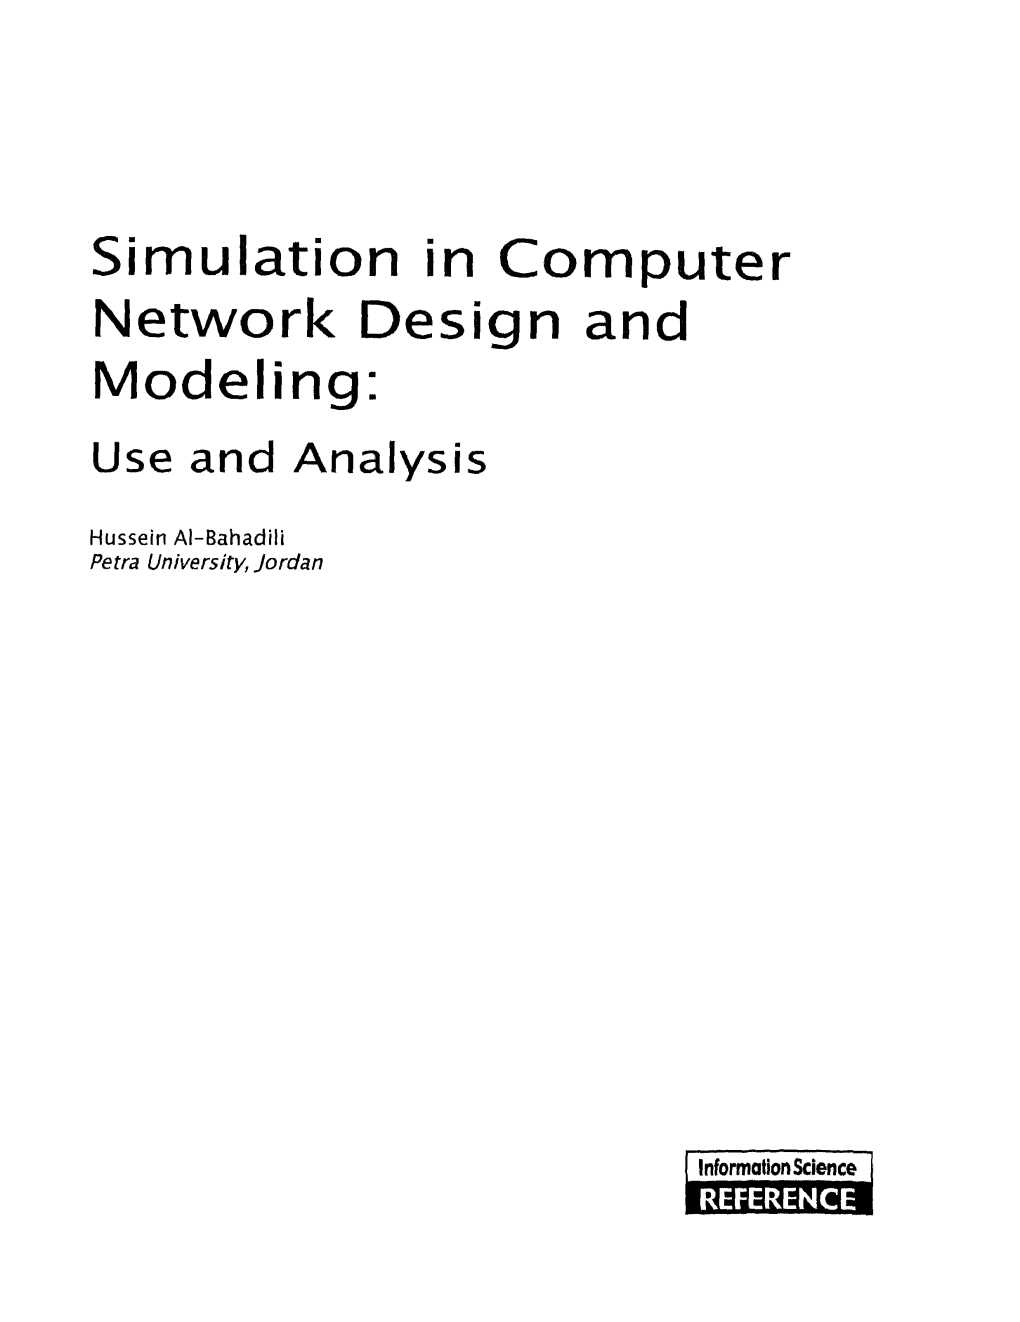 Simulation in Computer Network Design and Modeling: Use and Analysis